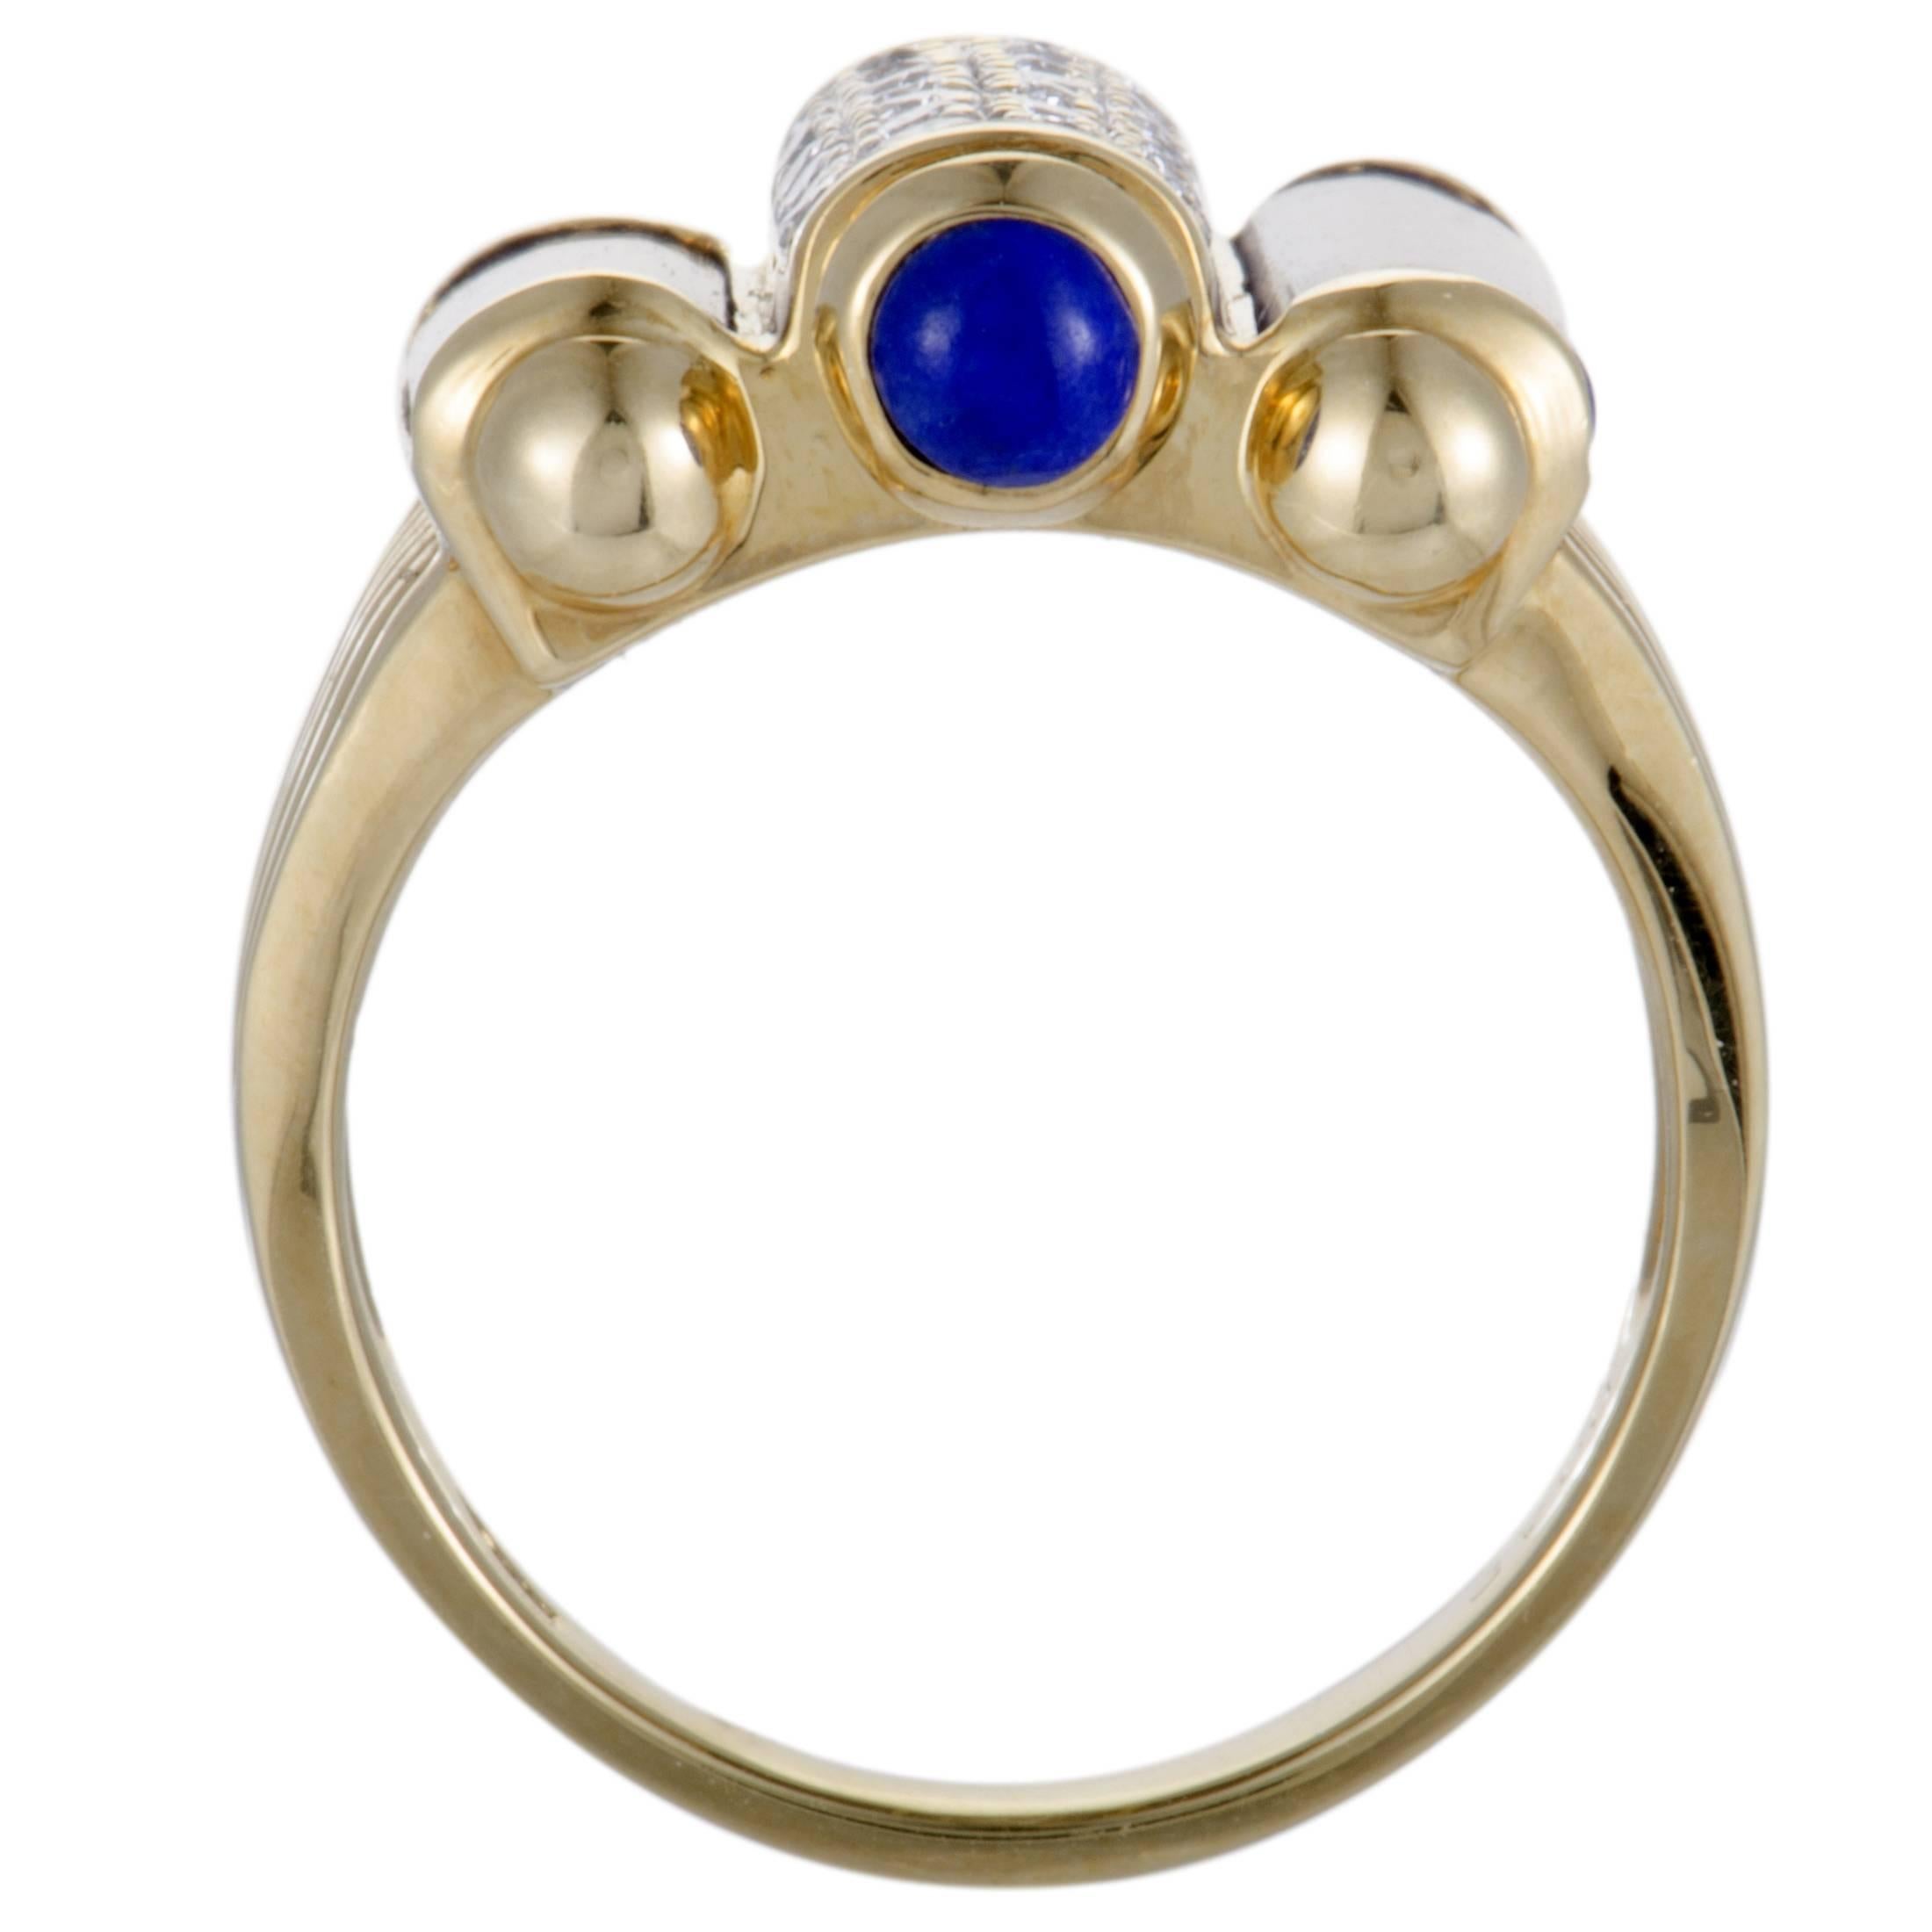 Gorgeously designed and wonderfully decorated, this 18K yellow gold ring boasts an exceptionally prestigious and refined appeal. The beautiful ring is adorned with 0.42ct of sparkling diamonds and mesmerizing lapis lazuli stones that add vibrance